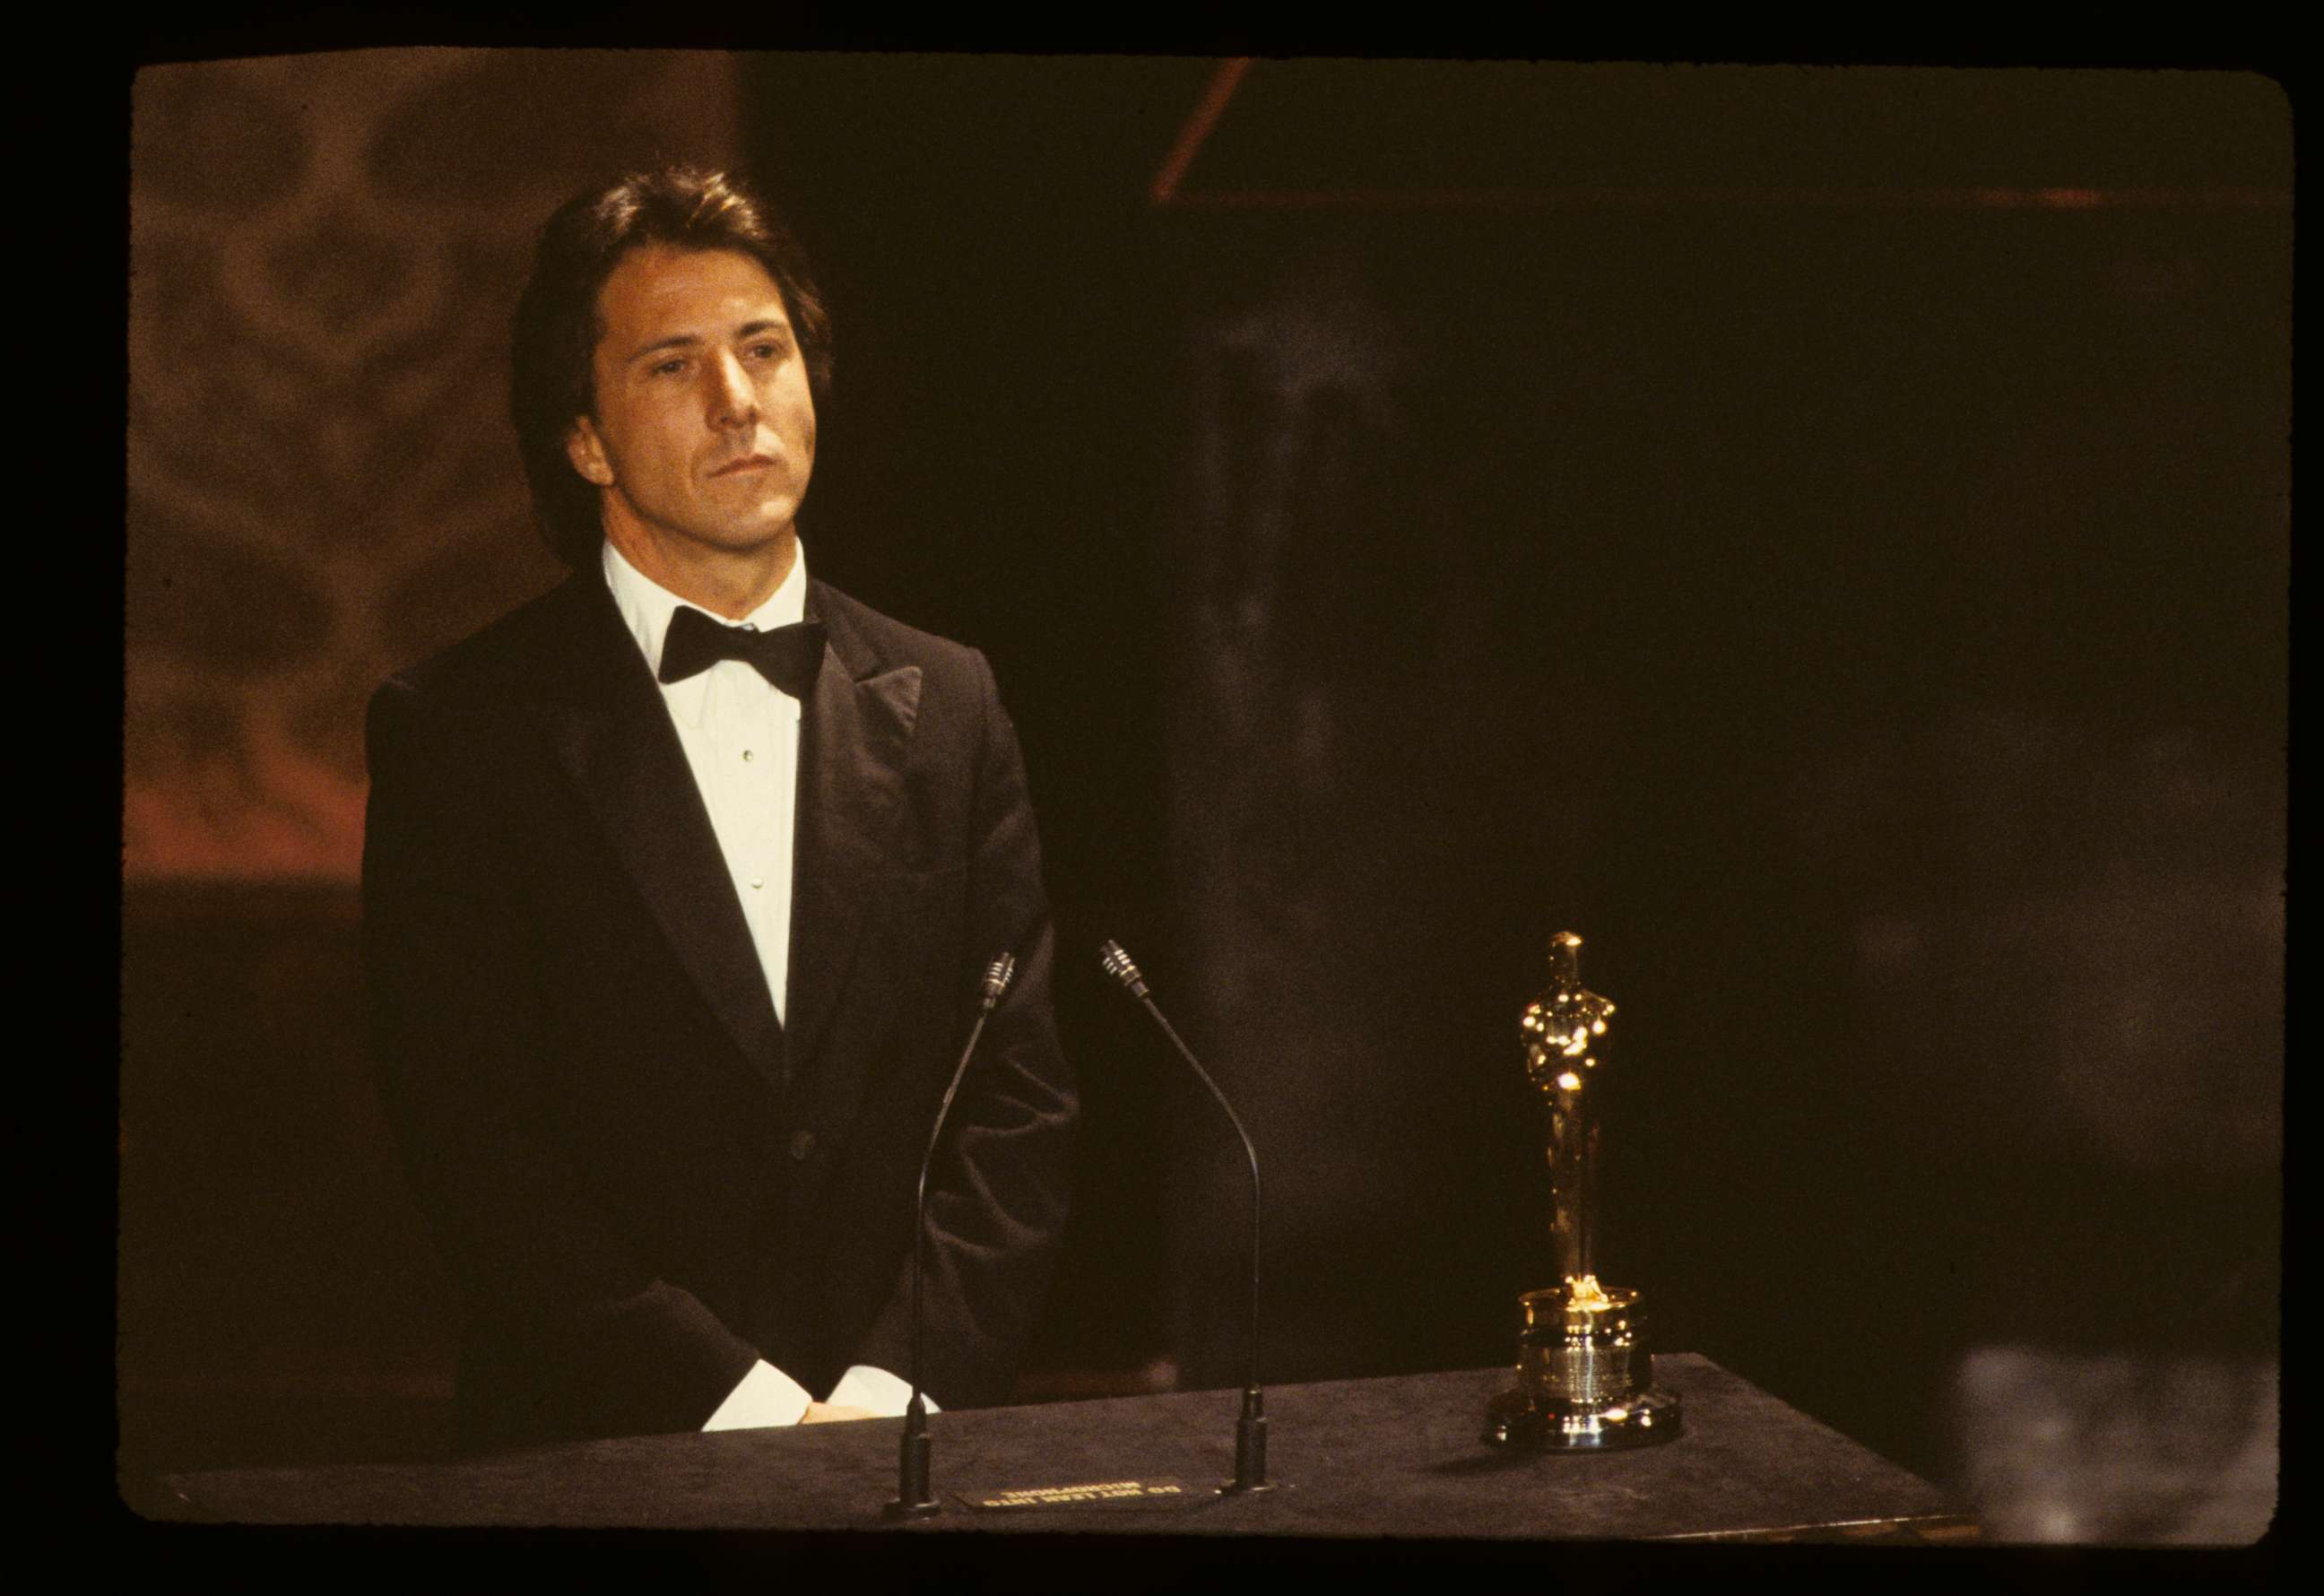 PHOTO: Dustin Hoffman receives Best Actor Oscar for his performance in "Kramer vs. Kramer," at the 52nd Annual Academy Awards, April 14, 1980 in Los Angeles.